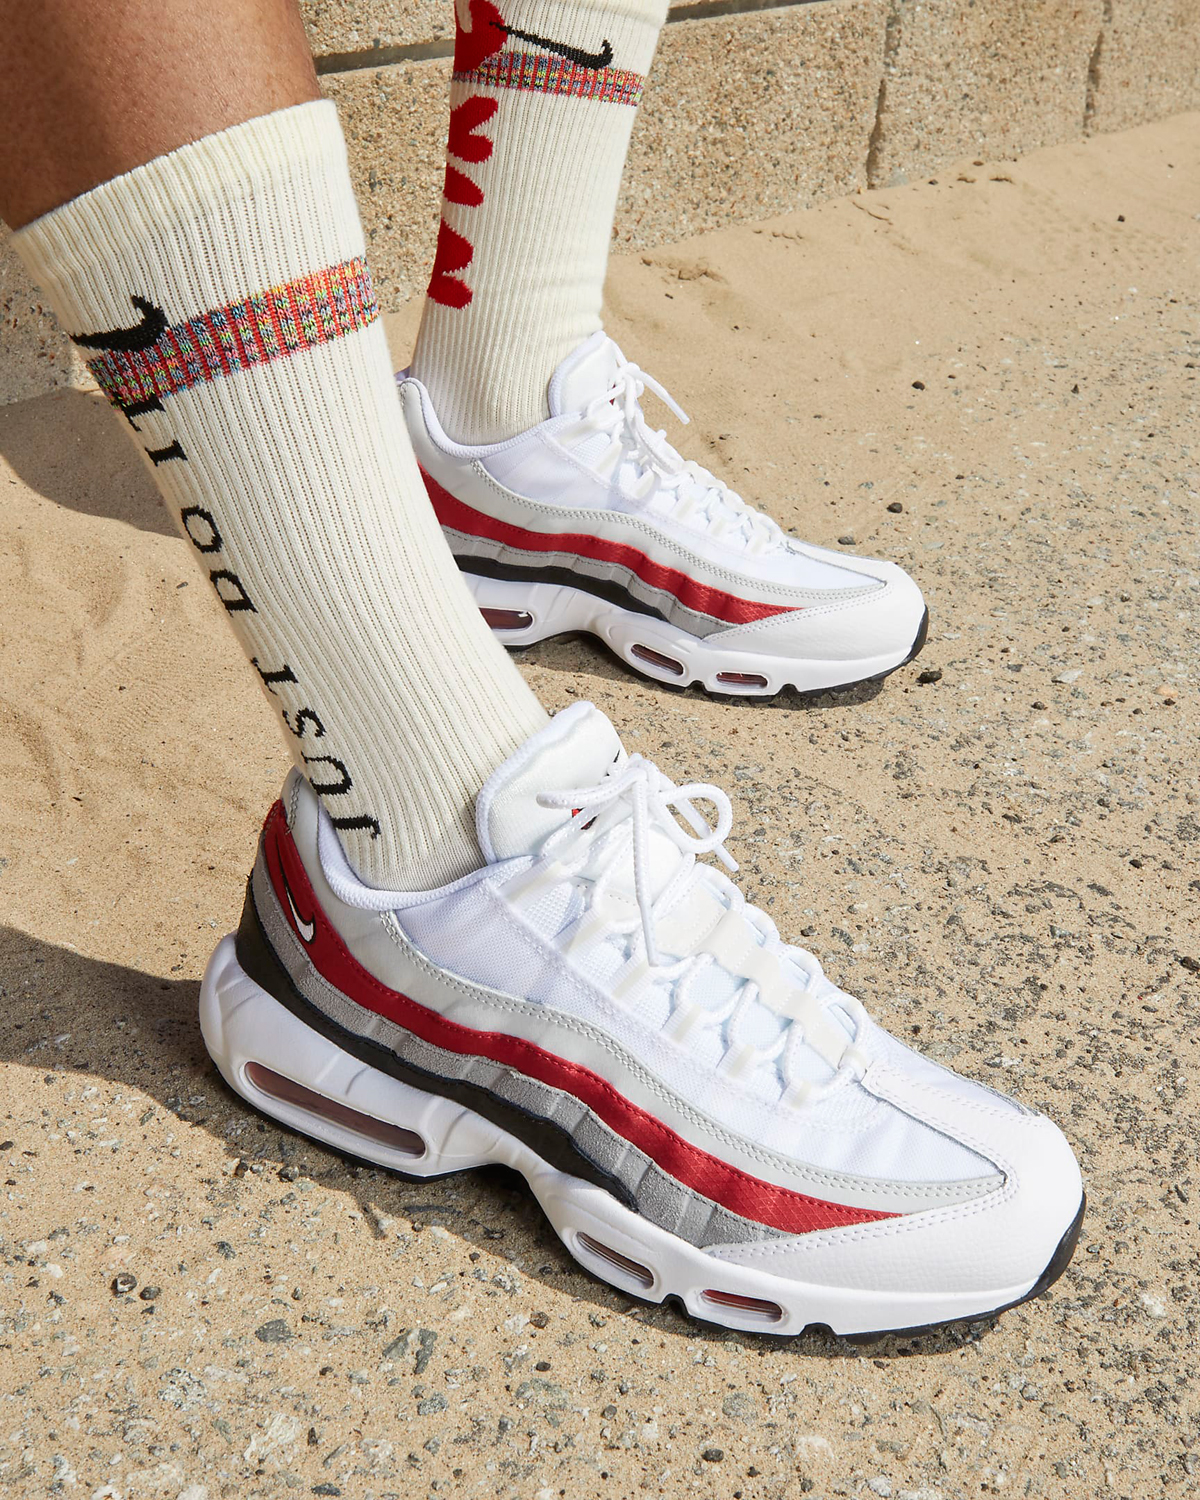 nike-air-max-95-prototype-white-black-particle-grey-varsity-red-on-feet